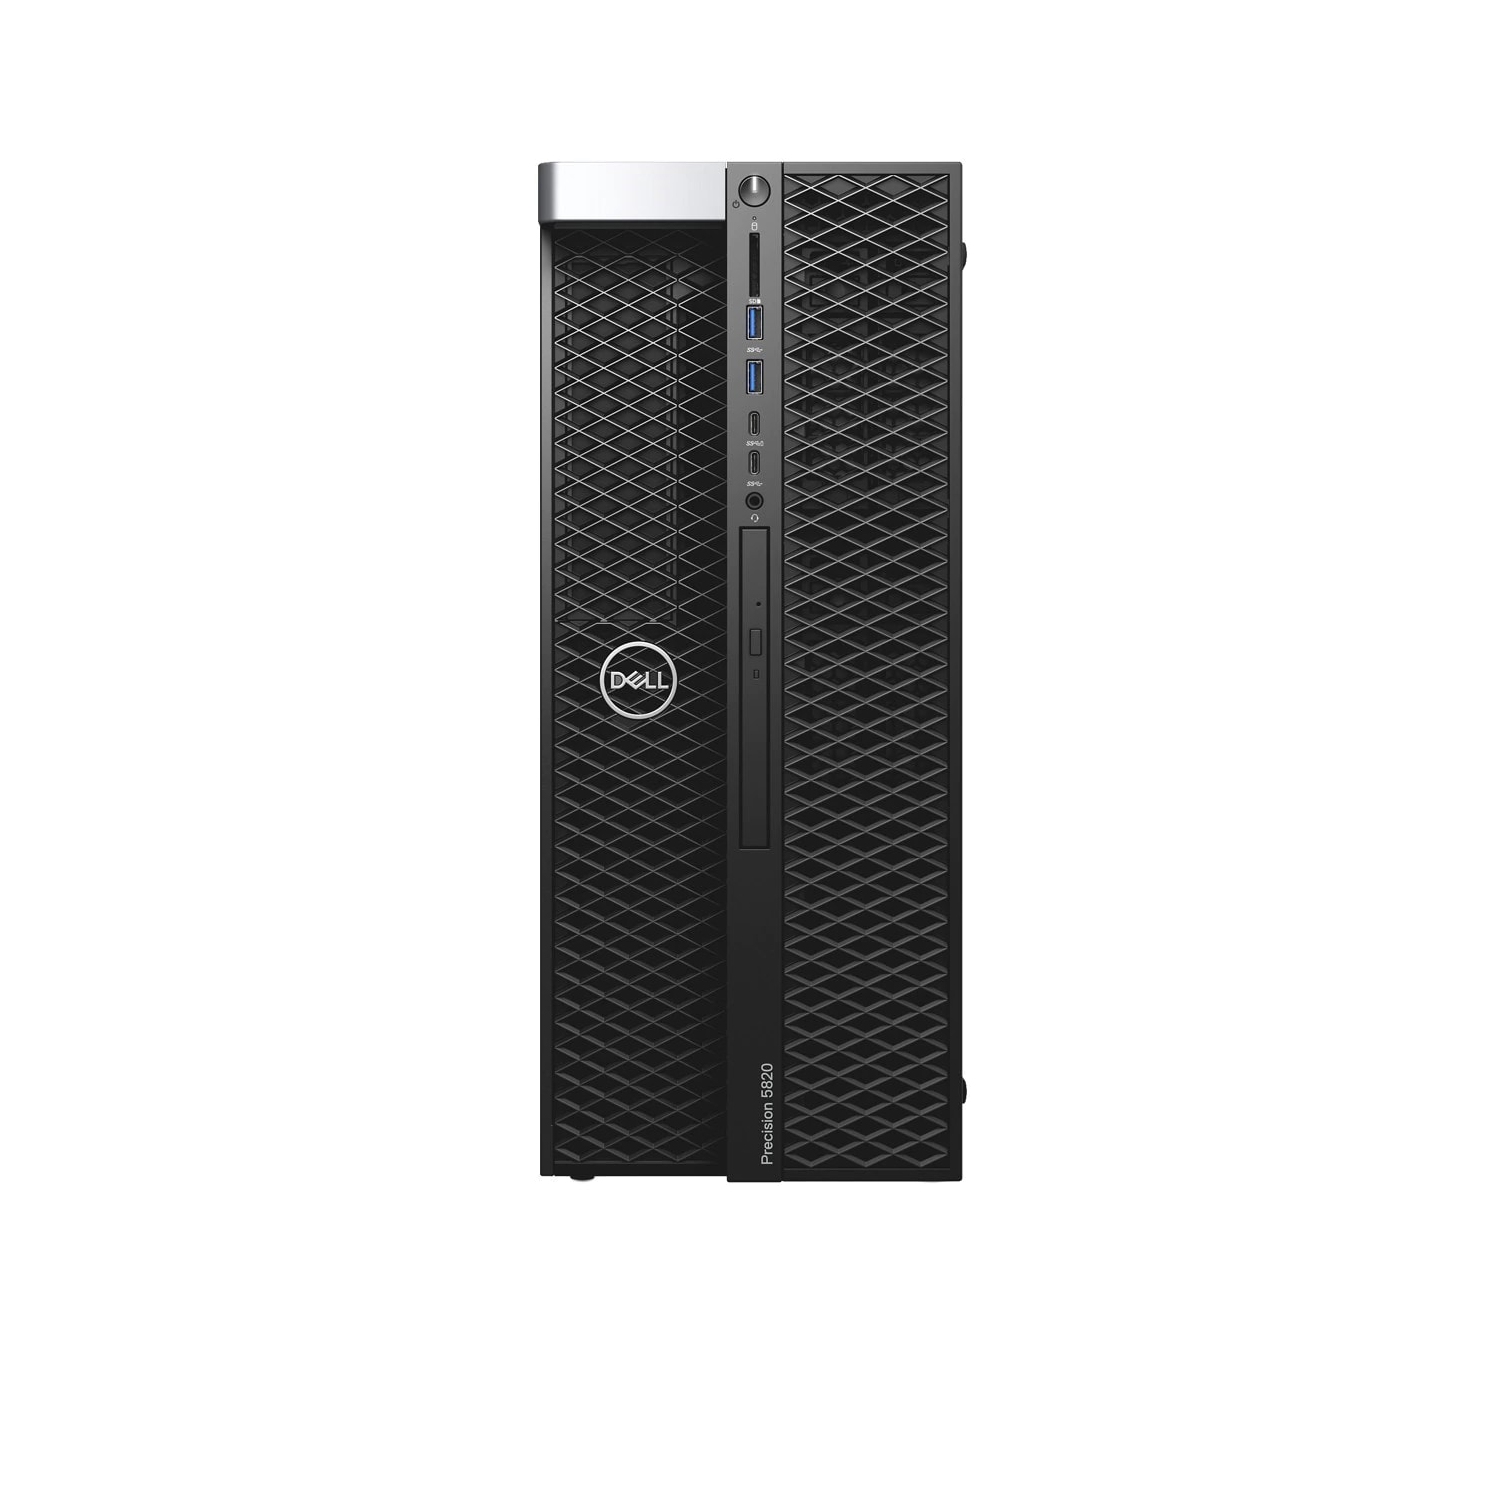 Refurbished (Excellent) - Dell Precision T5820 Workstation Desktop (2018) | Core Xeon W - 1TB SSD - 64GB RAM - RTX 4000 | 8 Cores @ 4.5 GHz Certified Refurbished